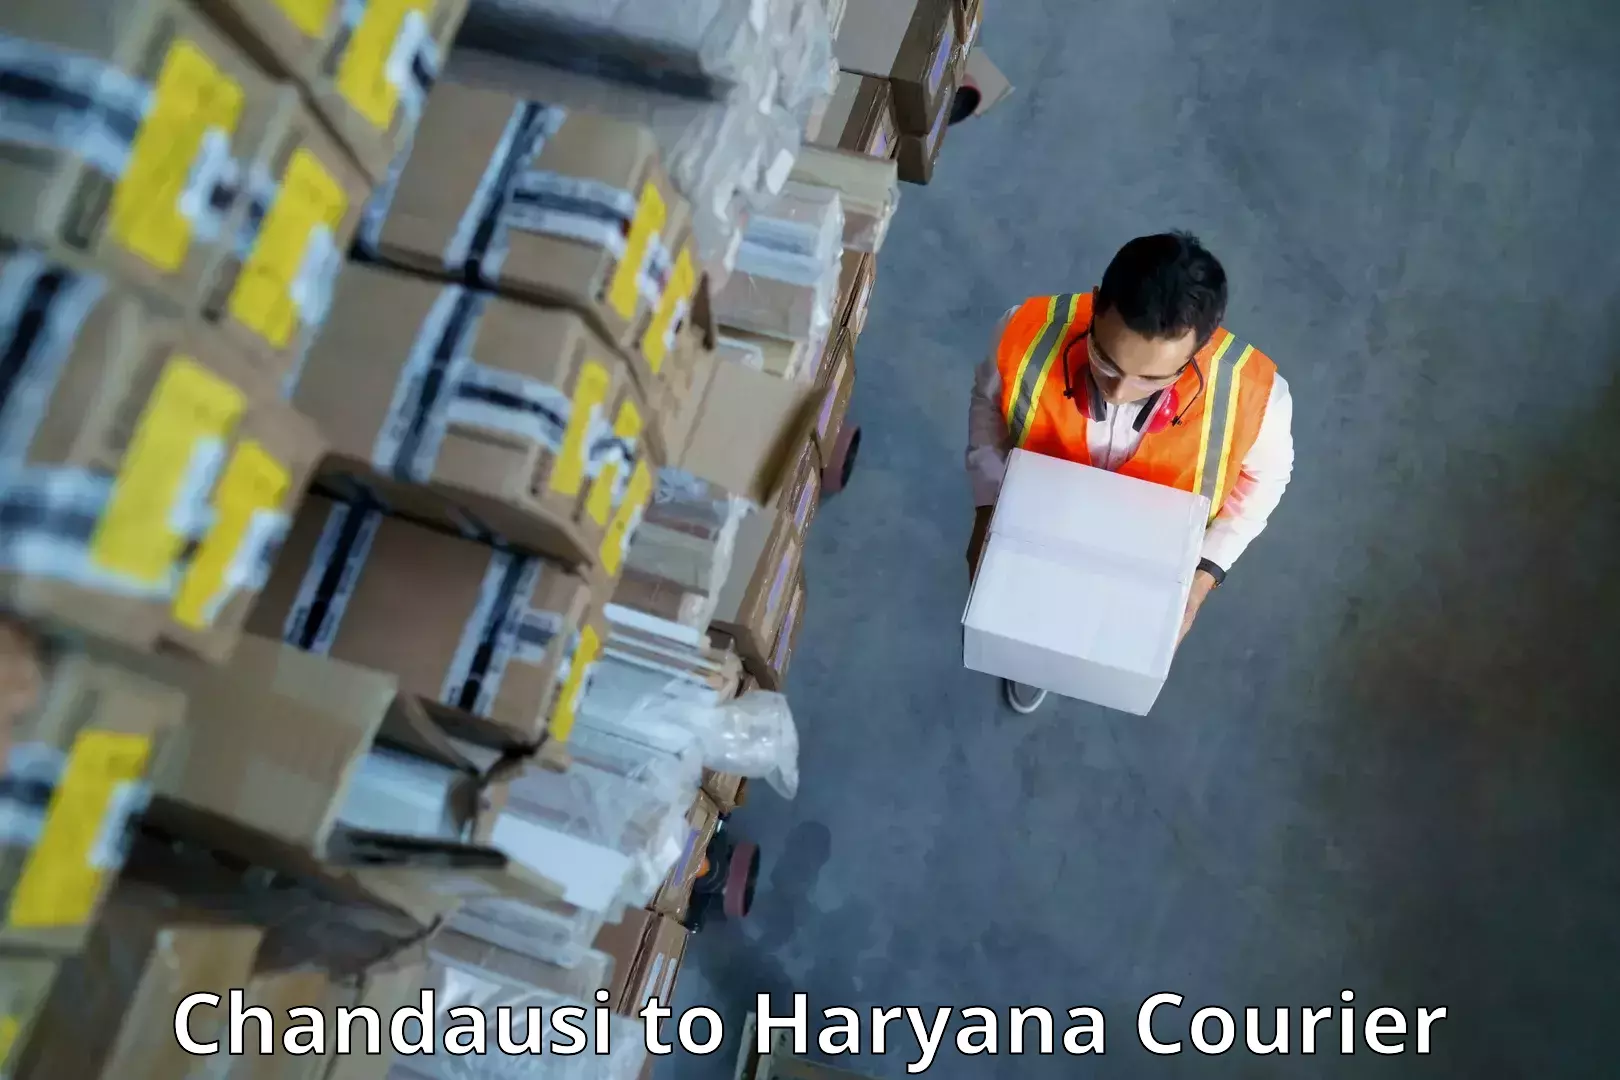 User-friendly delivery service Chandausi to Haryana